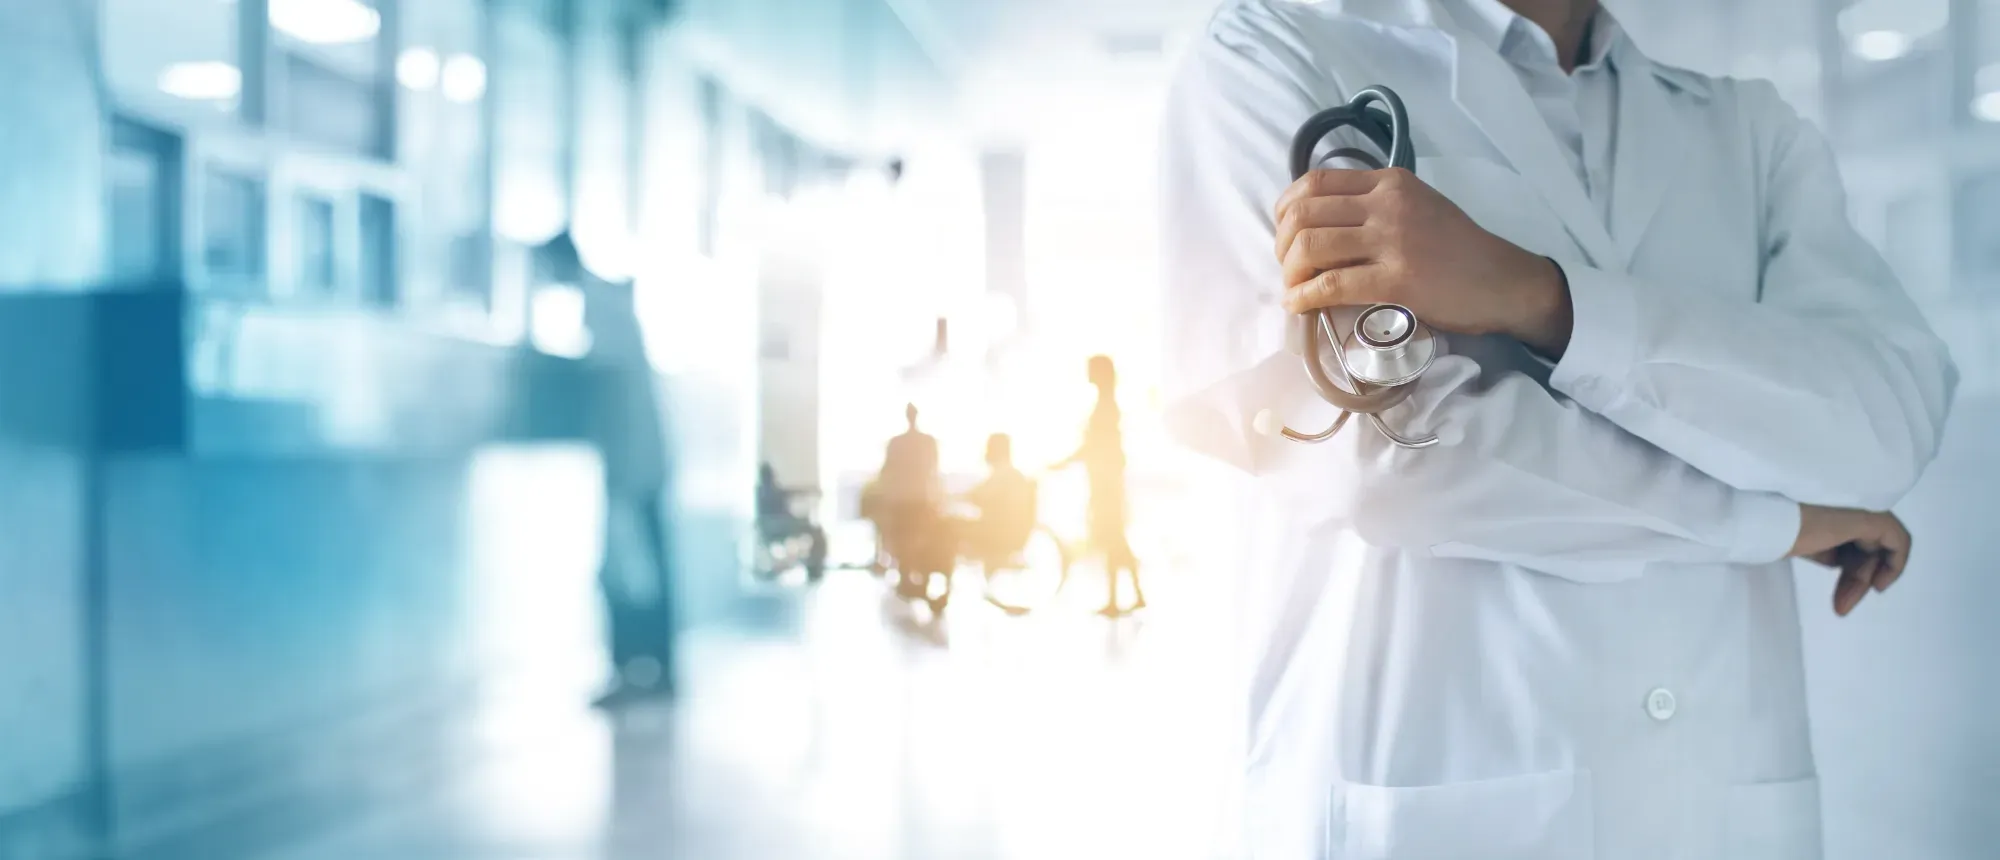 Hospital and Healthcare Executive Search | Monroe Consulting Group